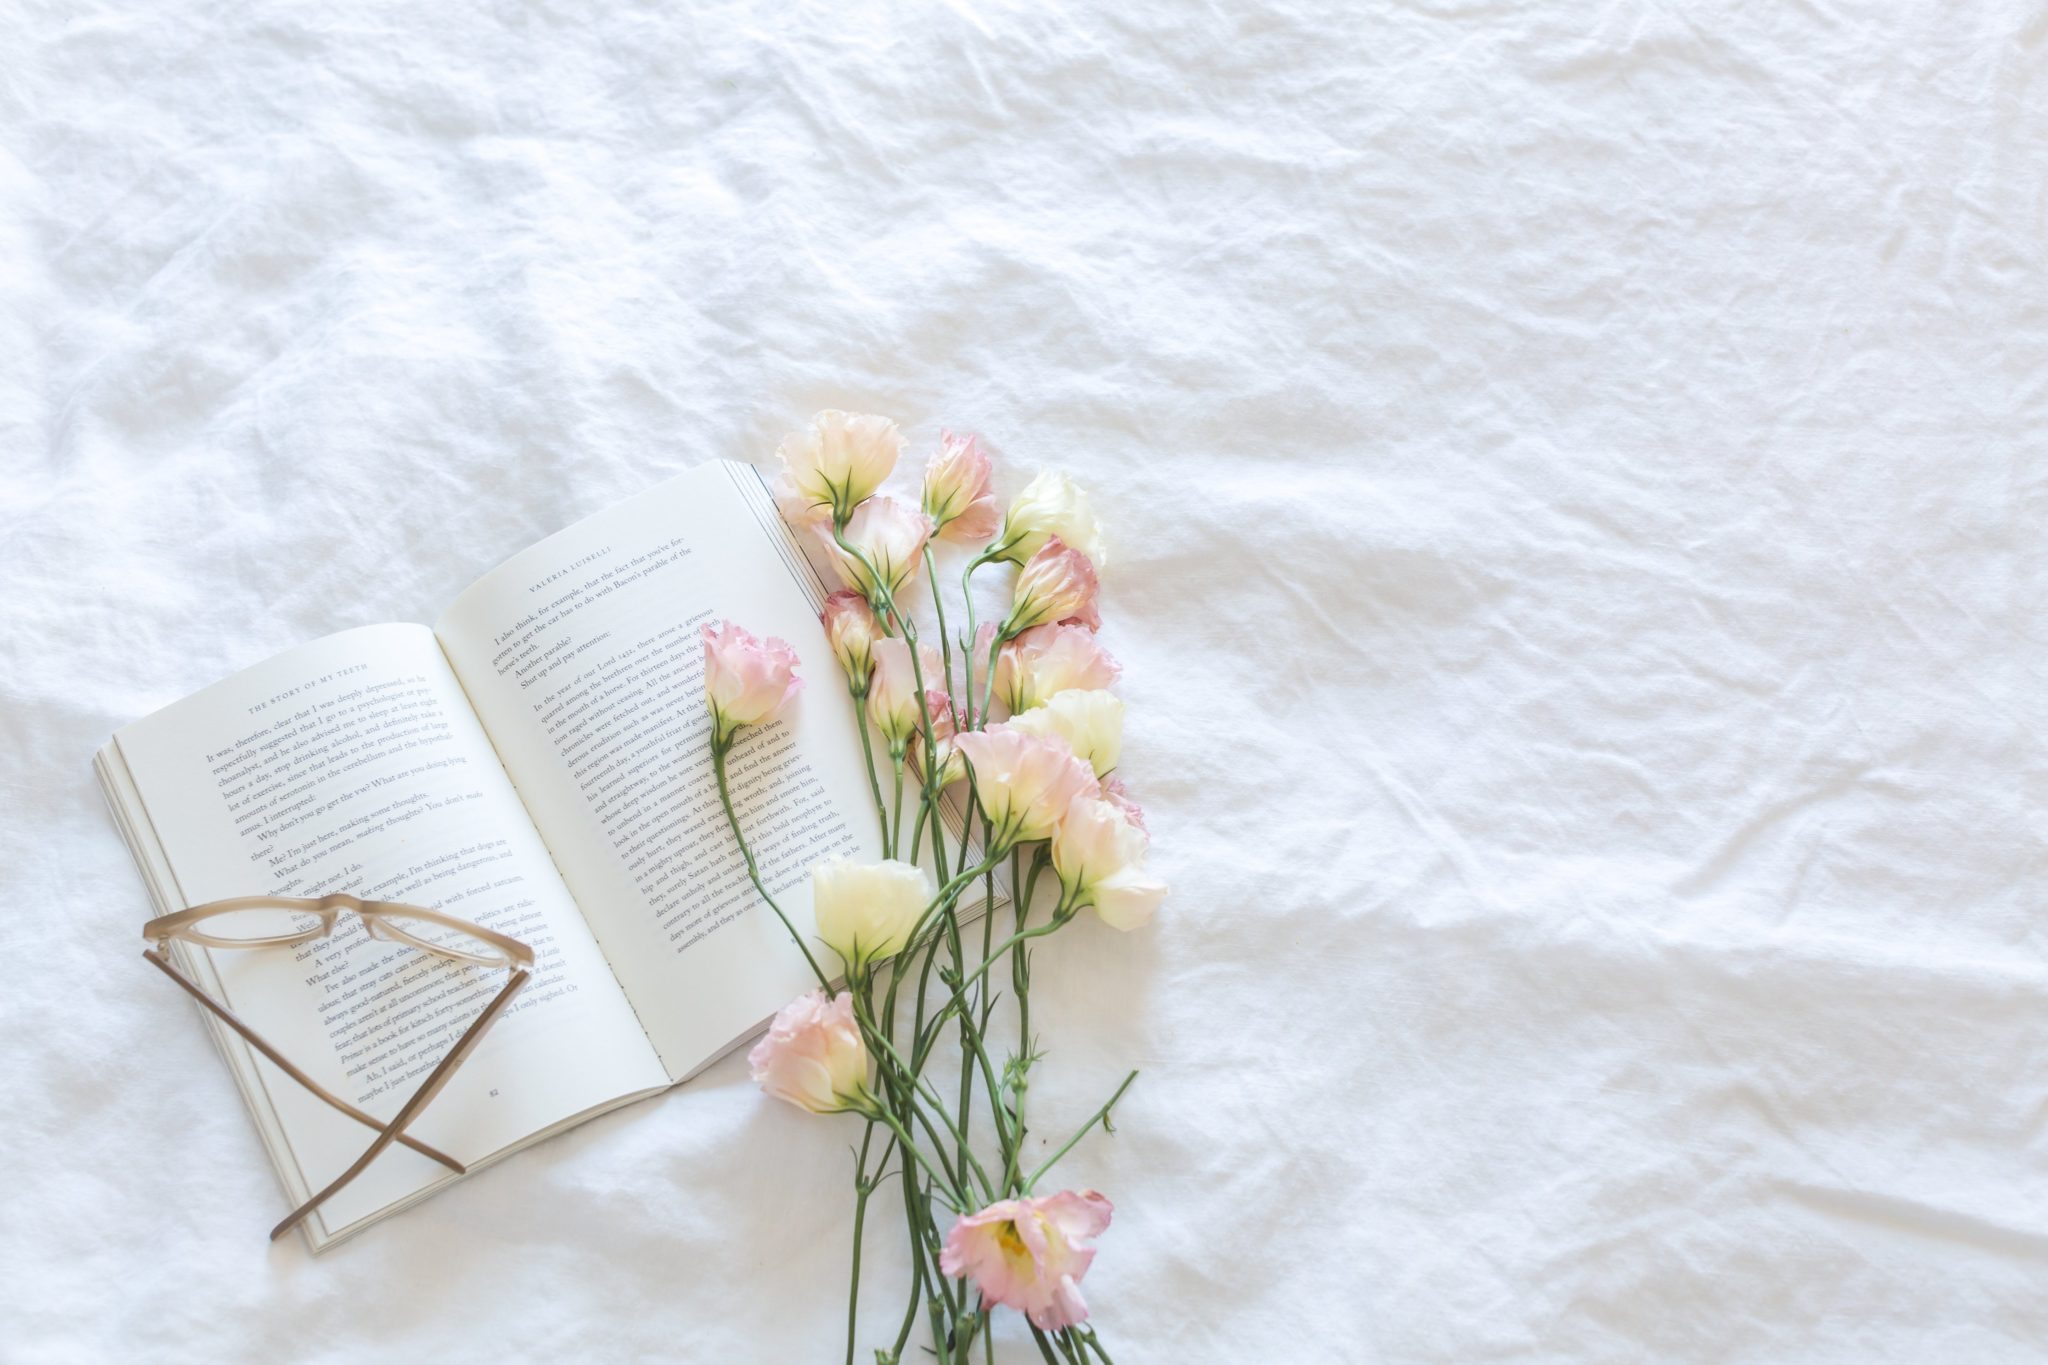 Christian book on white blanket with flowers and glasses